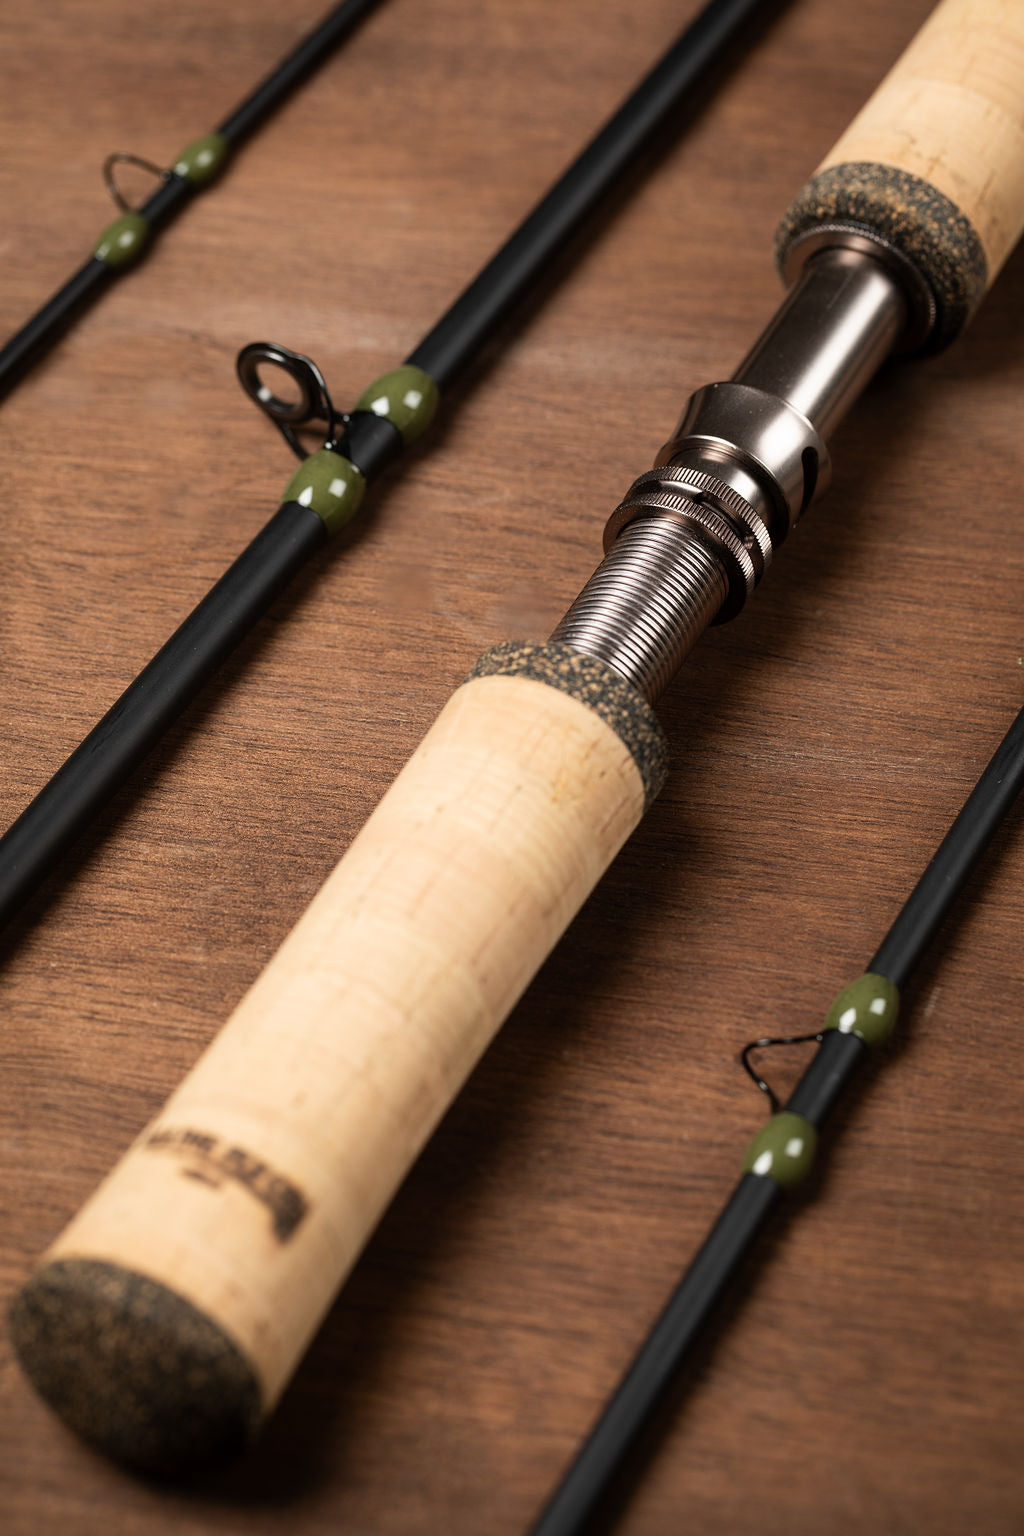 Wild Water Fly Fishing 11 Foot 4-Piece 7-Weight Switch Rod